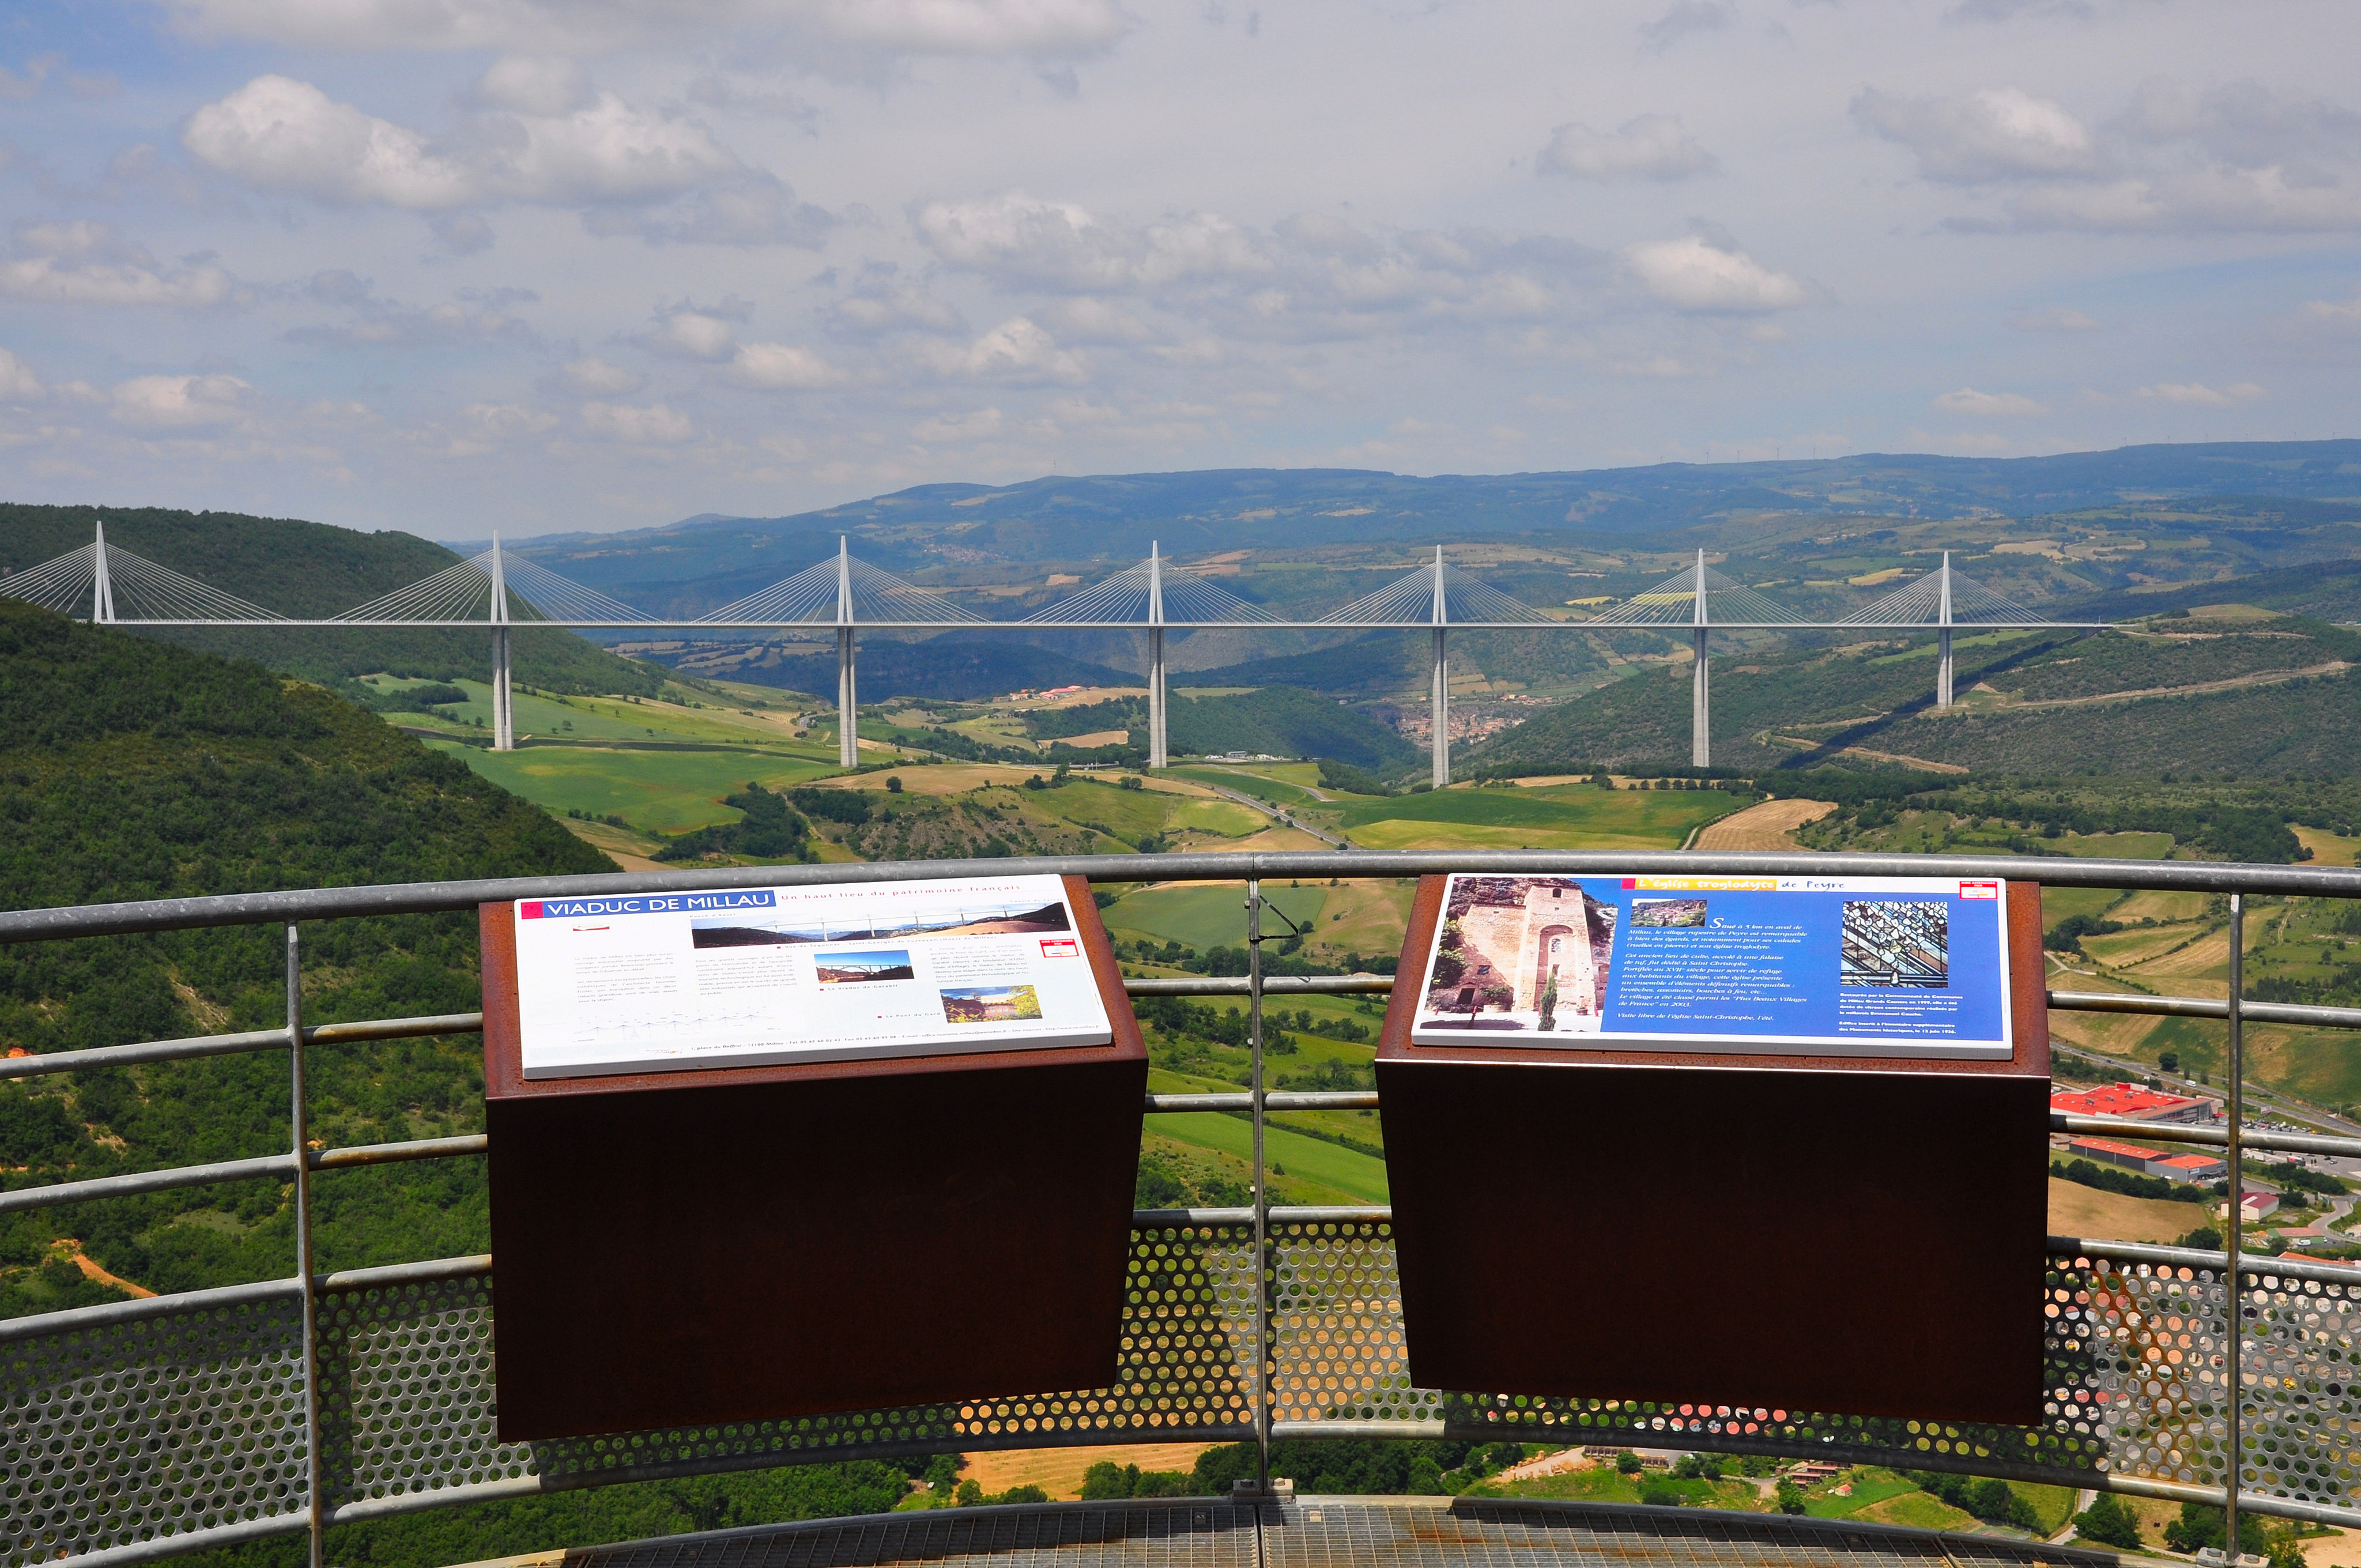 By camper over the highest viaduct in the world - the Millau Viaduct – main image